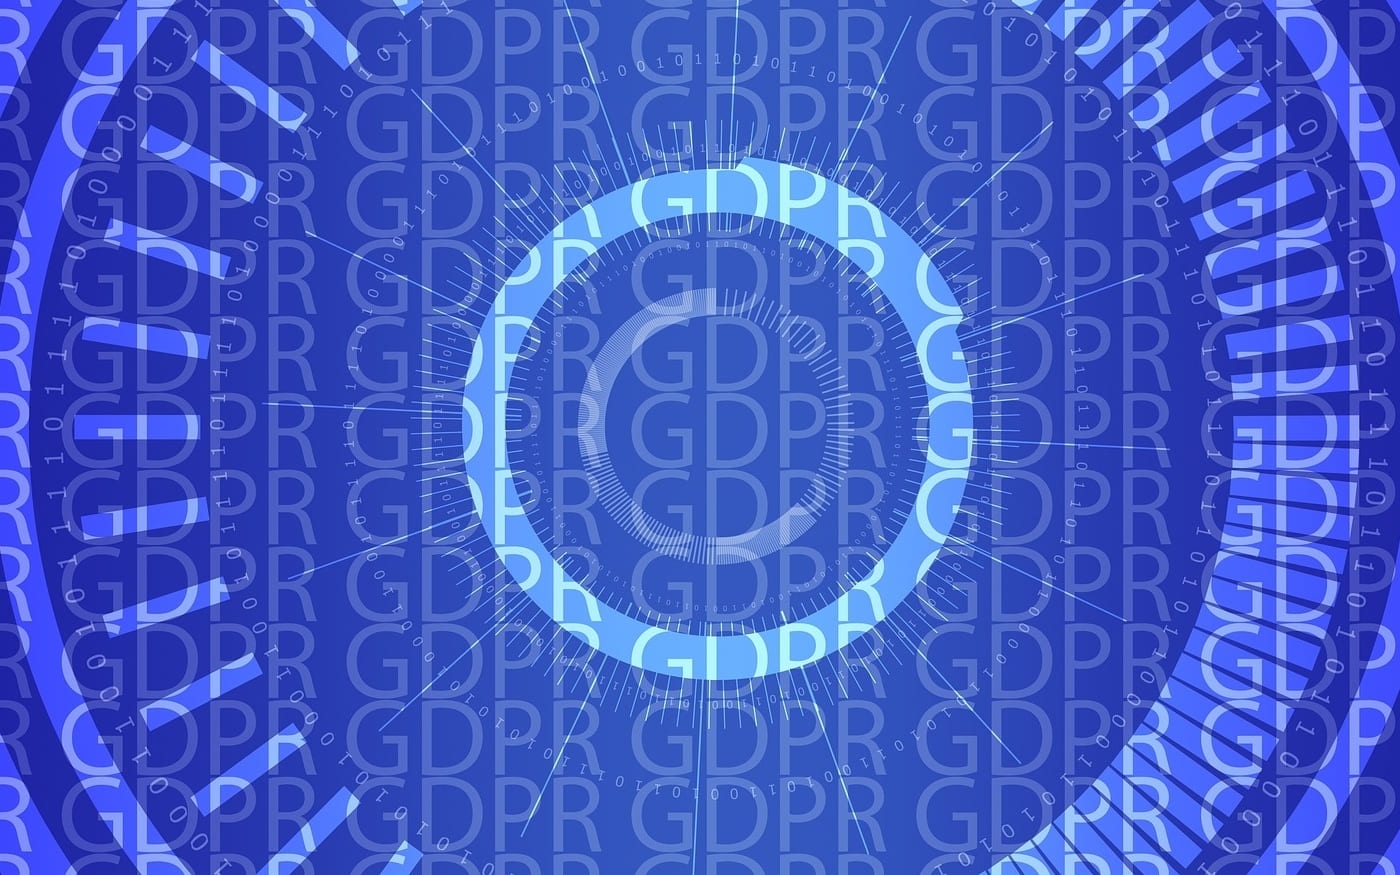 GDPR on blue background with circles